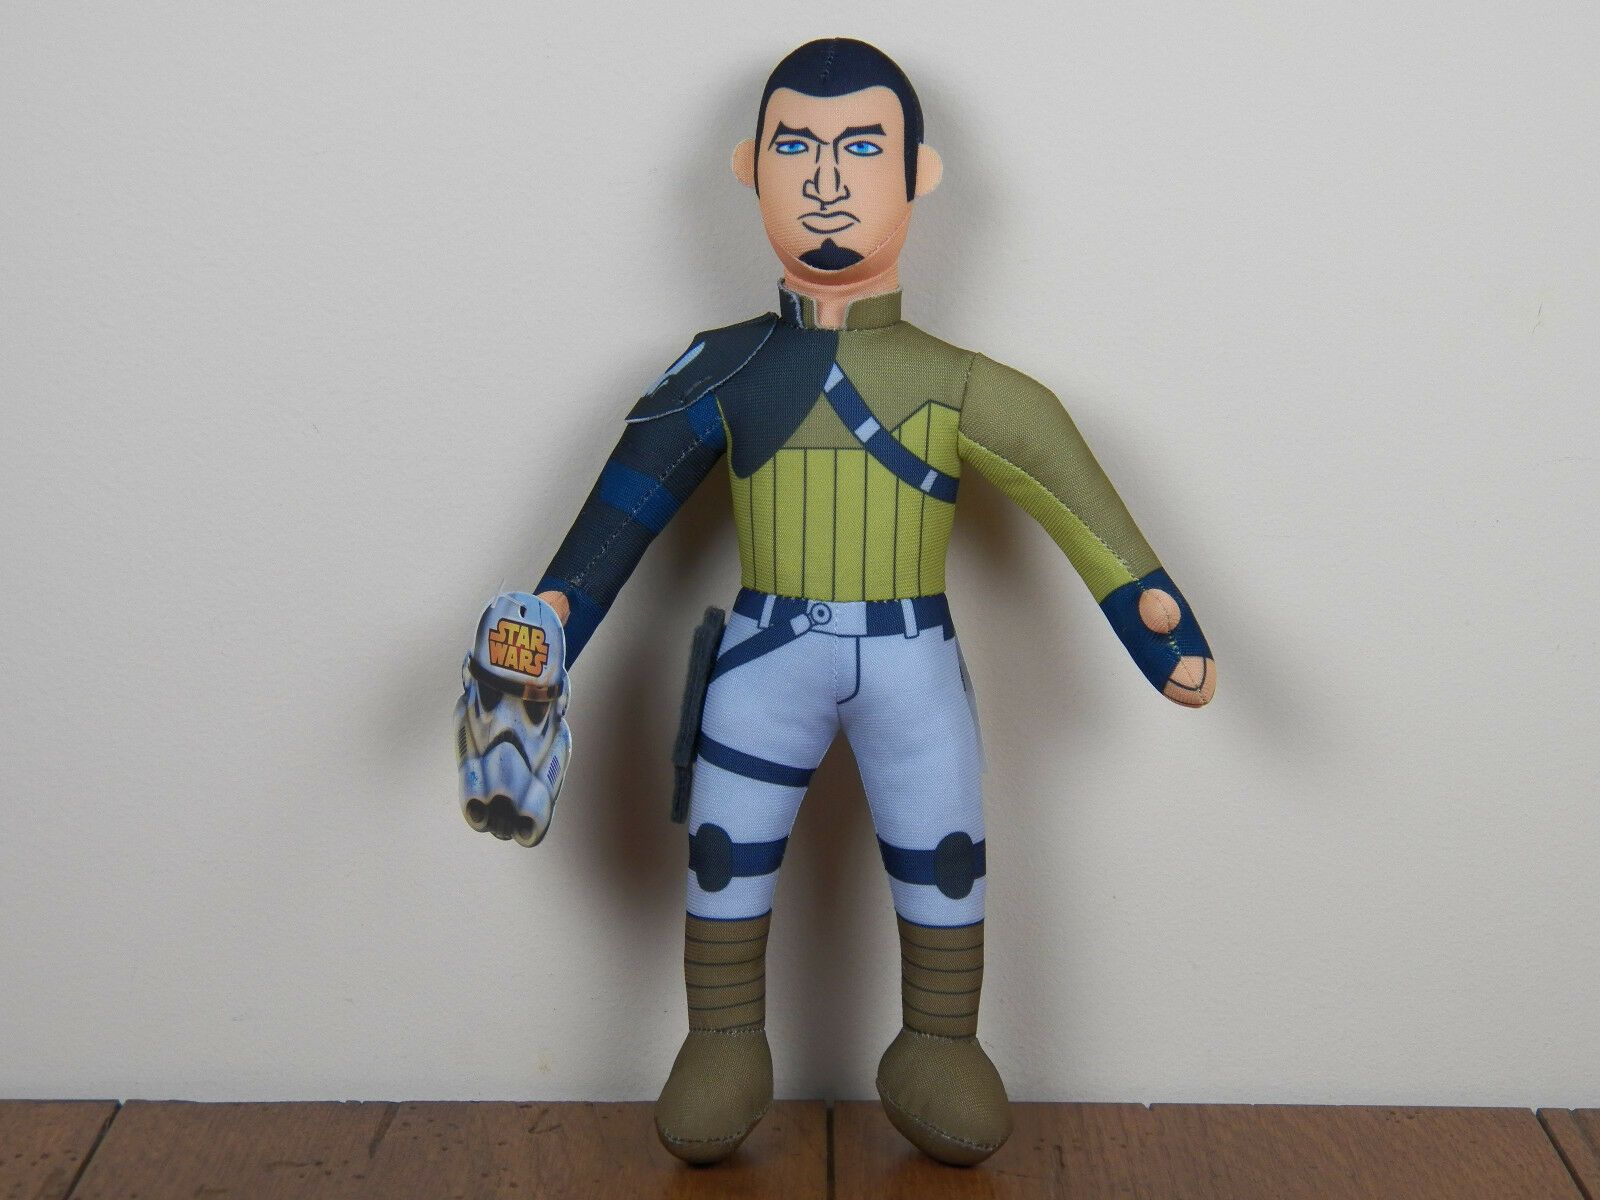 Disney Star Wars Rebels Kanan Jarrus Plush Doll 10 Inches With Tags online